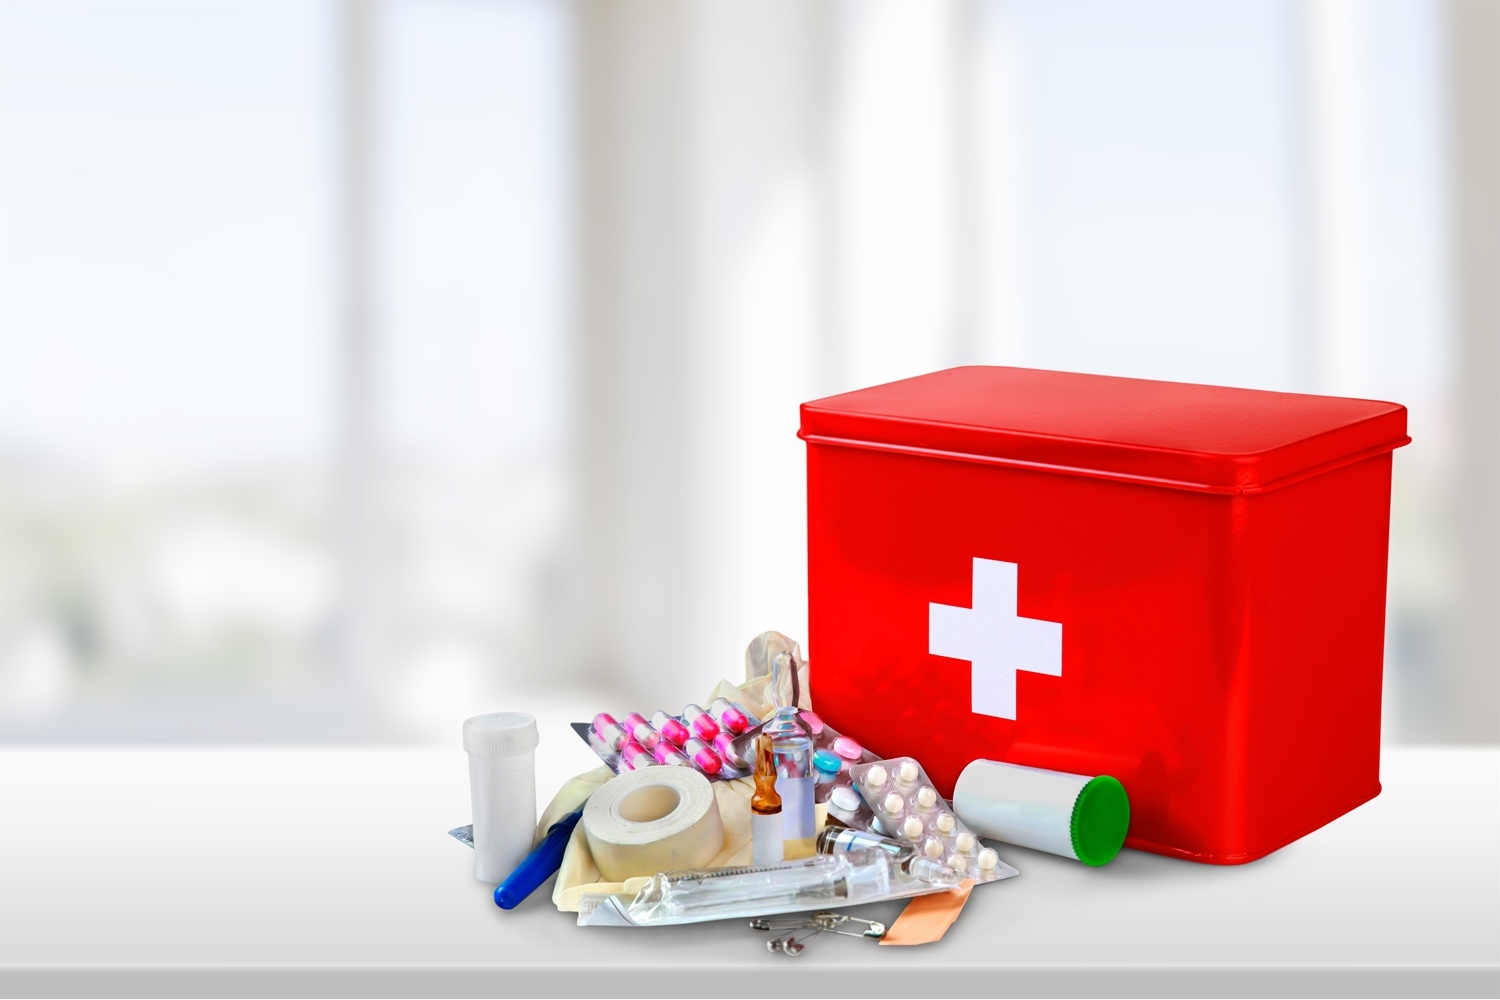 What should be included in a First Aid Kit